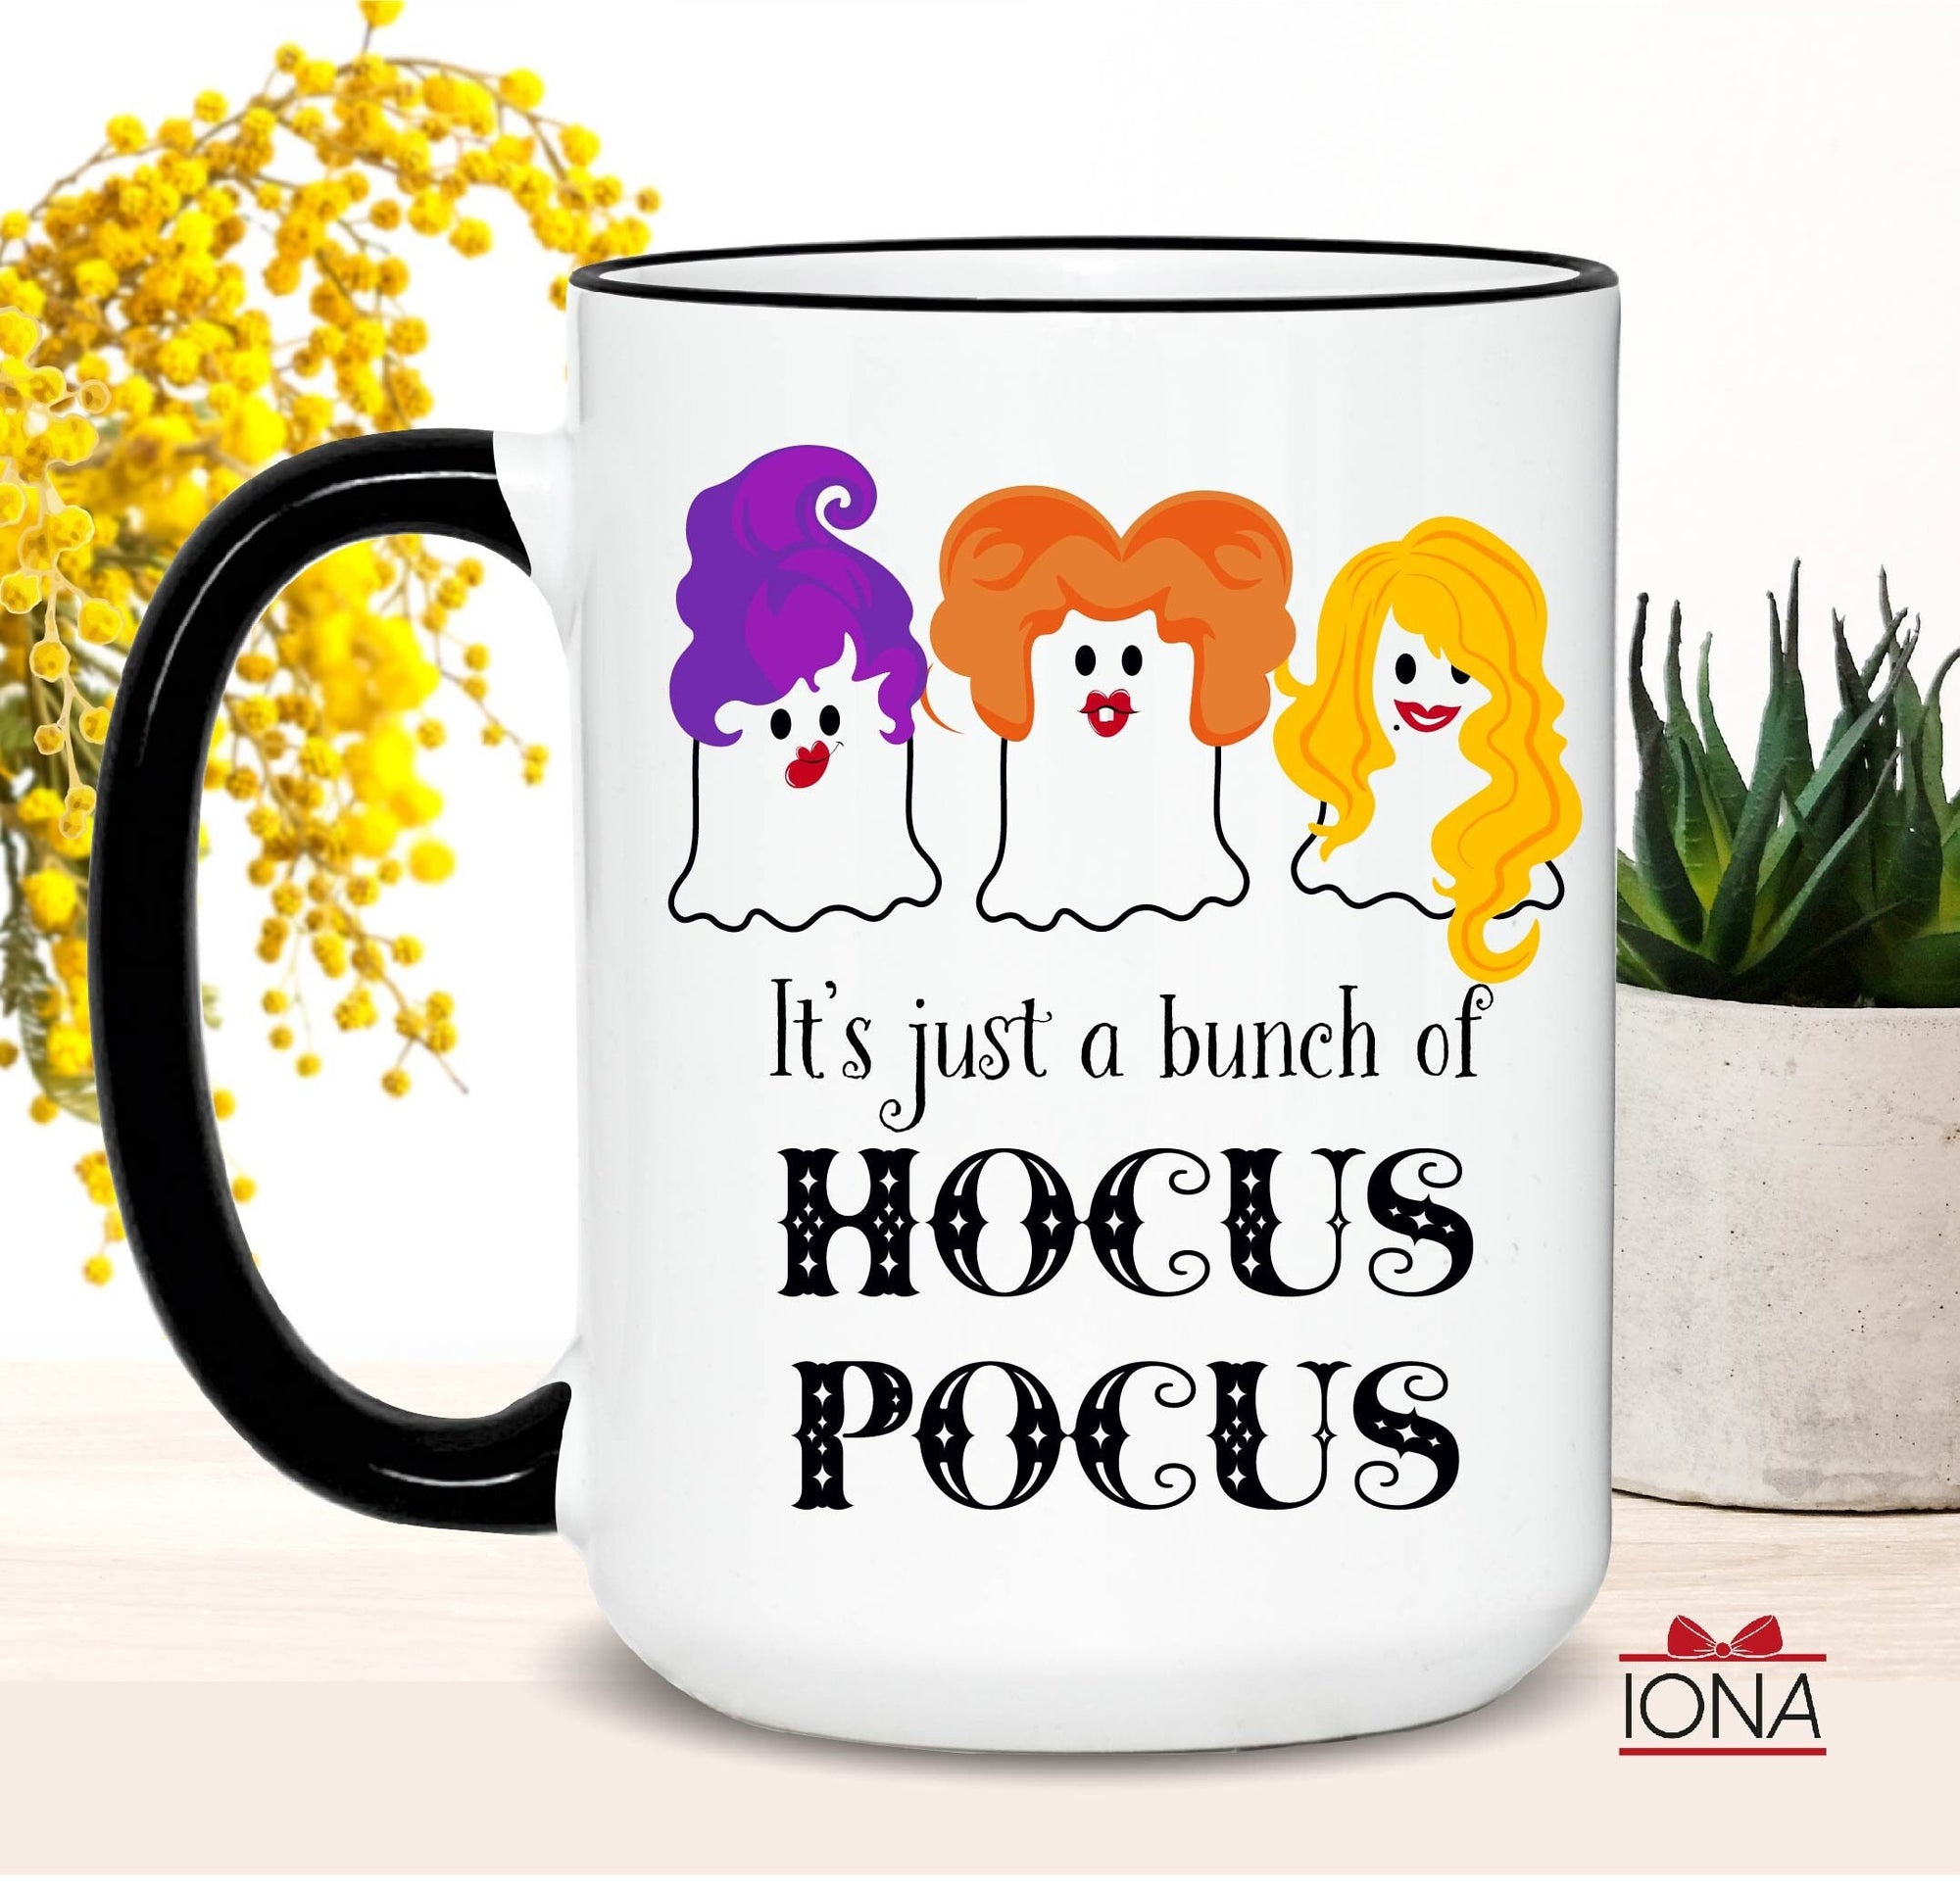 It's Just a Bunch of Hocus Pocus Coffee Mug, Funny Halloween Witchy Gothic Tea Novelty Cup, Sanderson Sisters ghosts, Fall Autumn Mug,Spooky